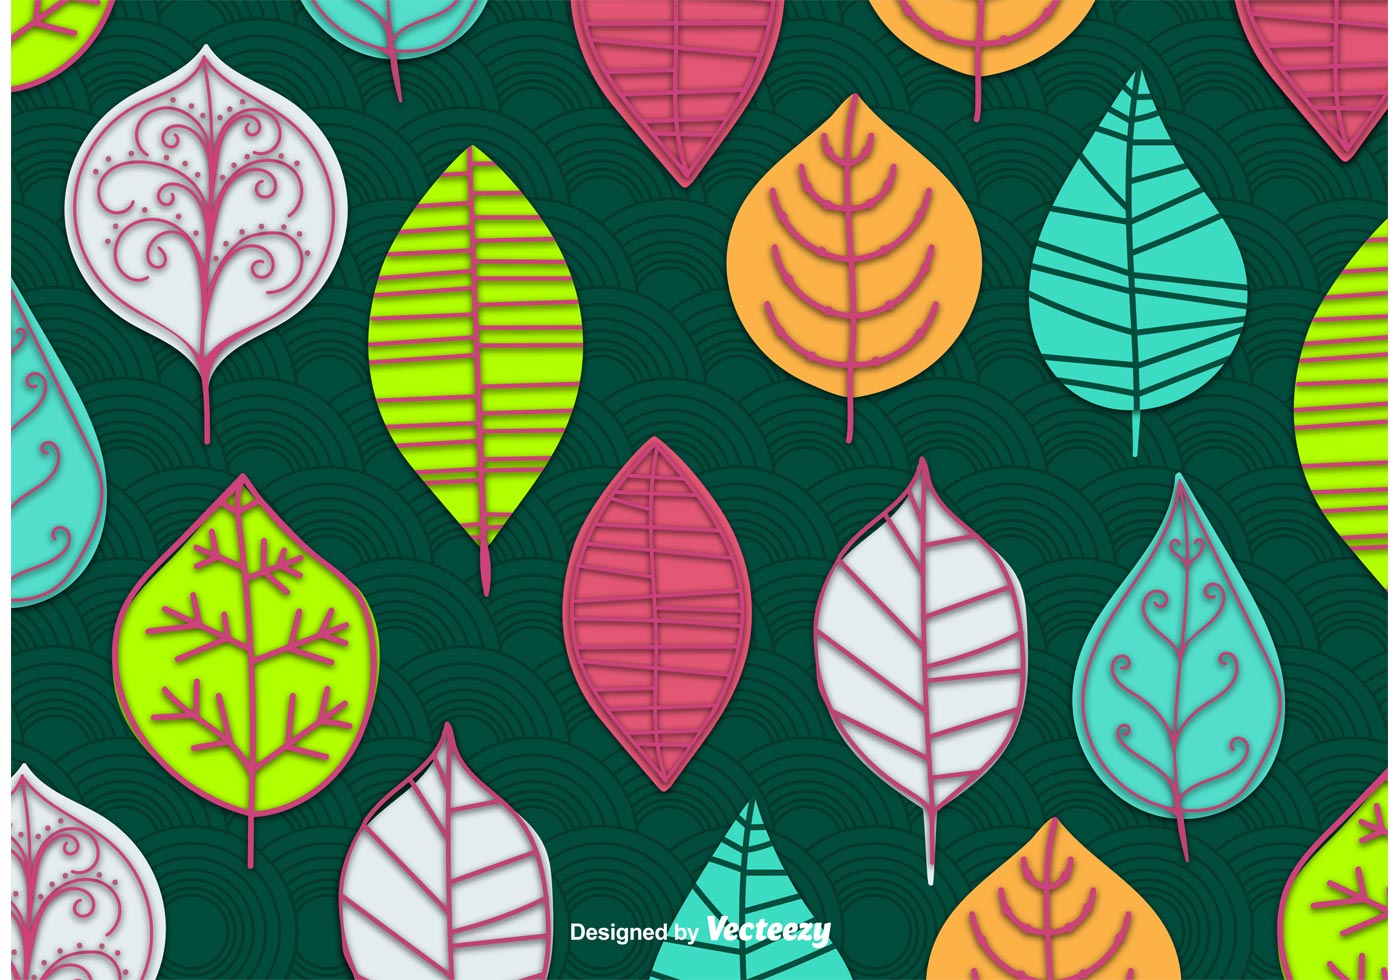 Wallpaper Pattern Free Vector Art - Abstract Leaves , HD Wallpaper & Backgrounds